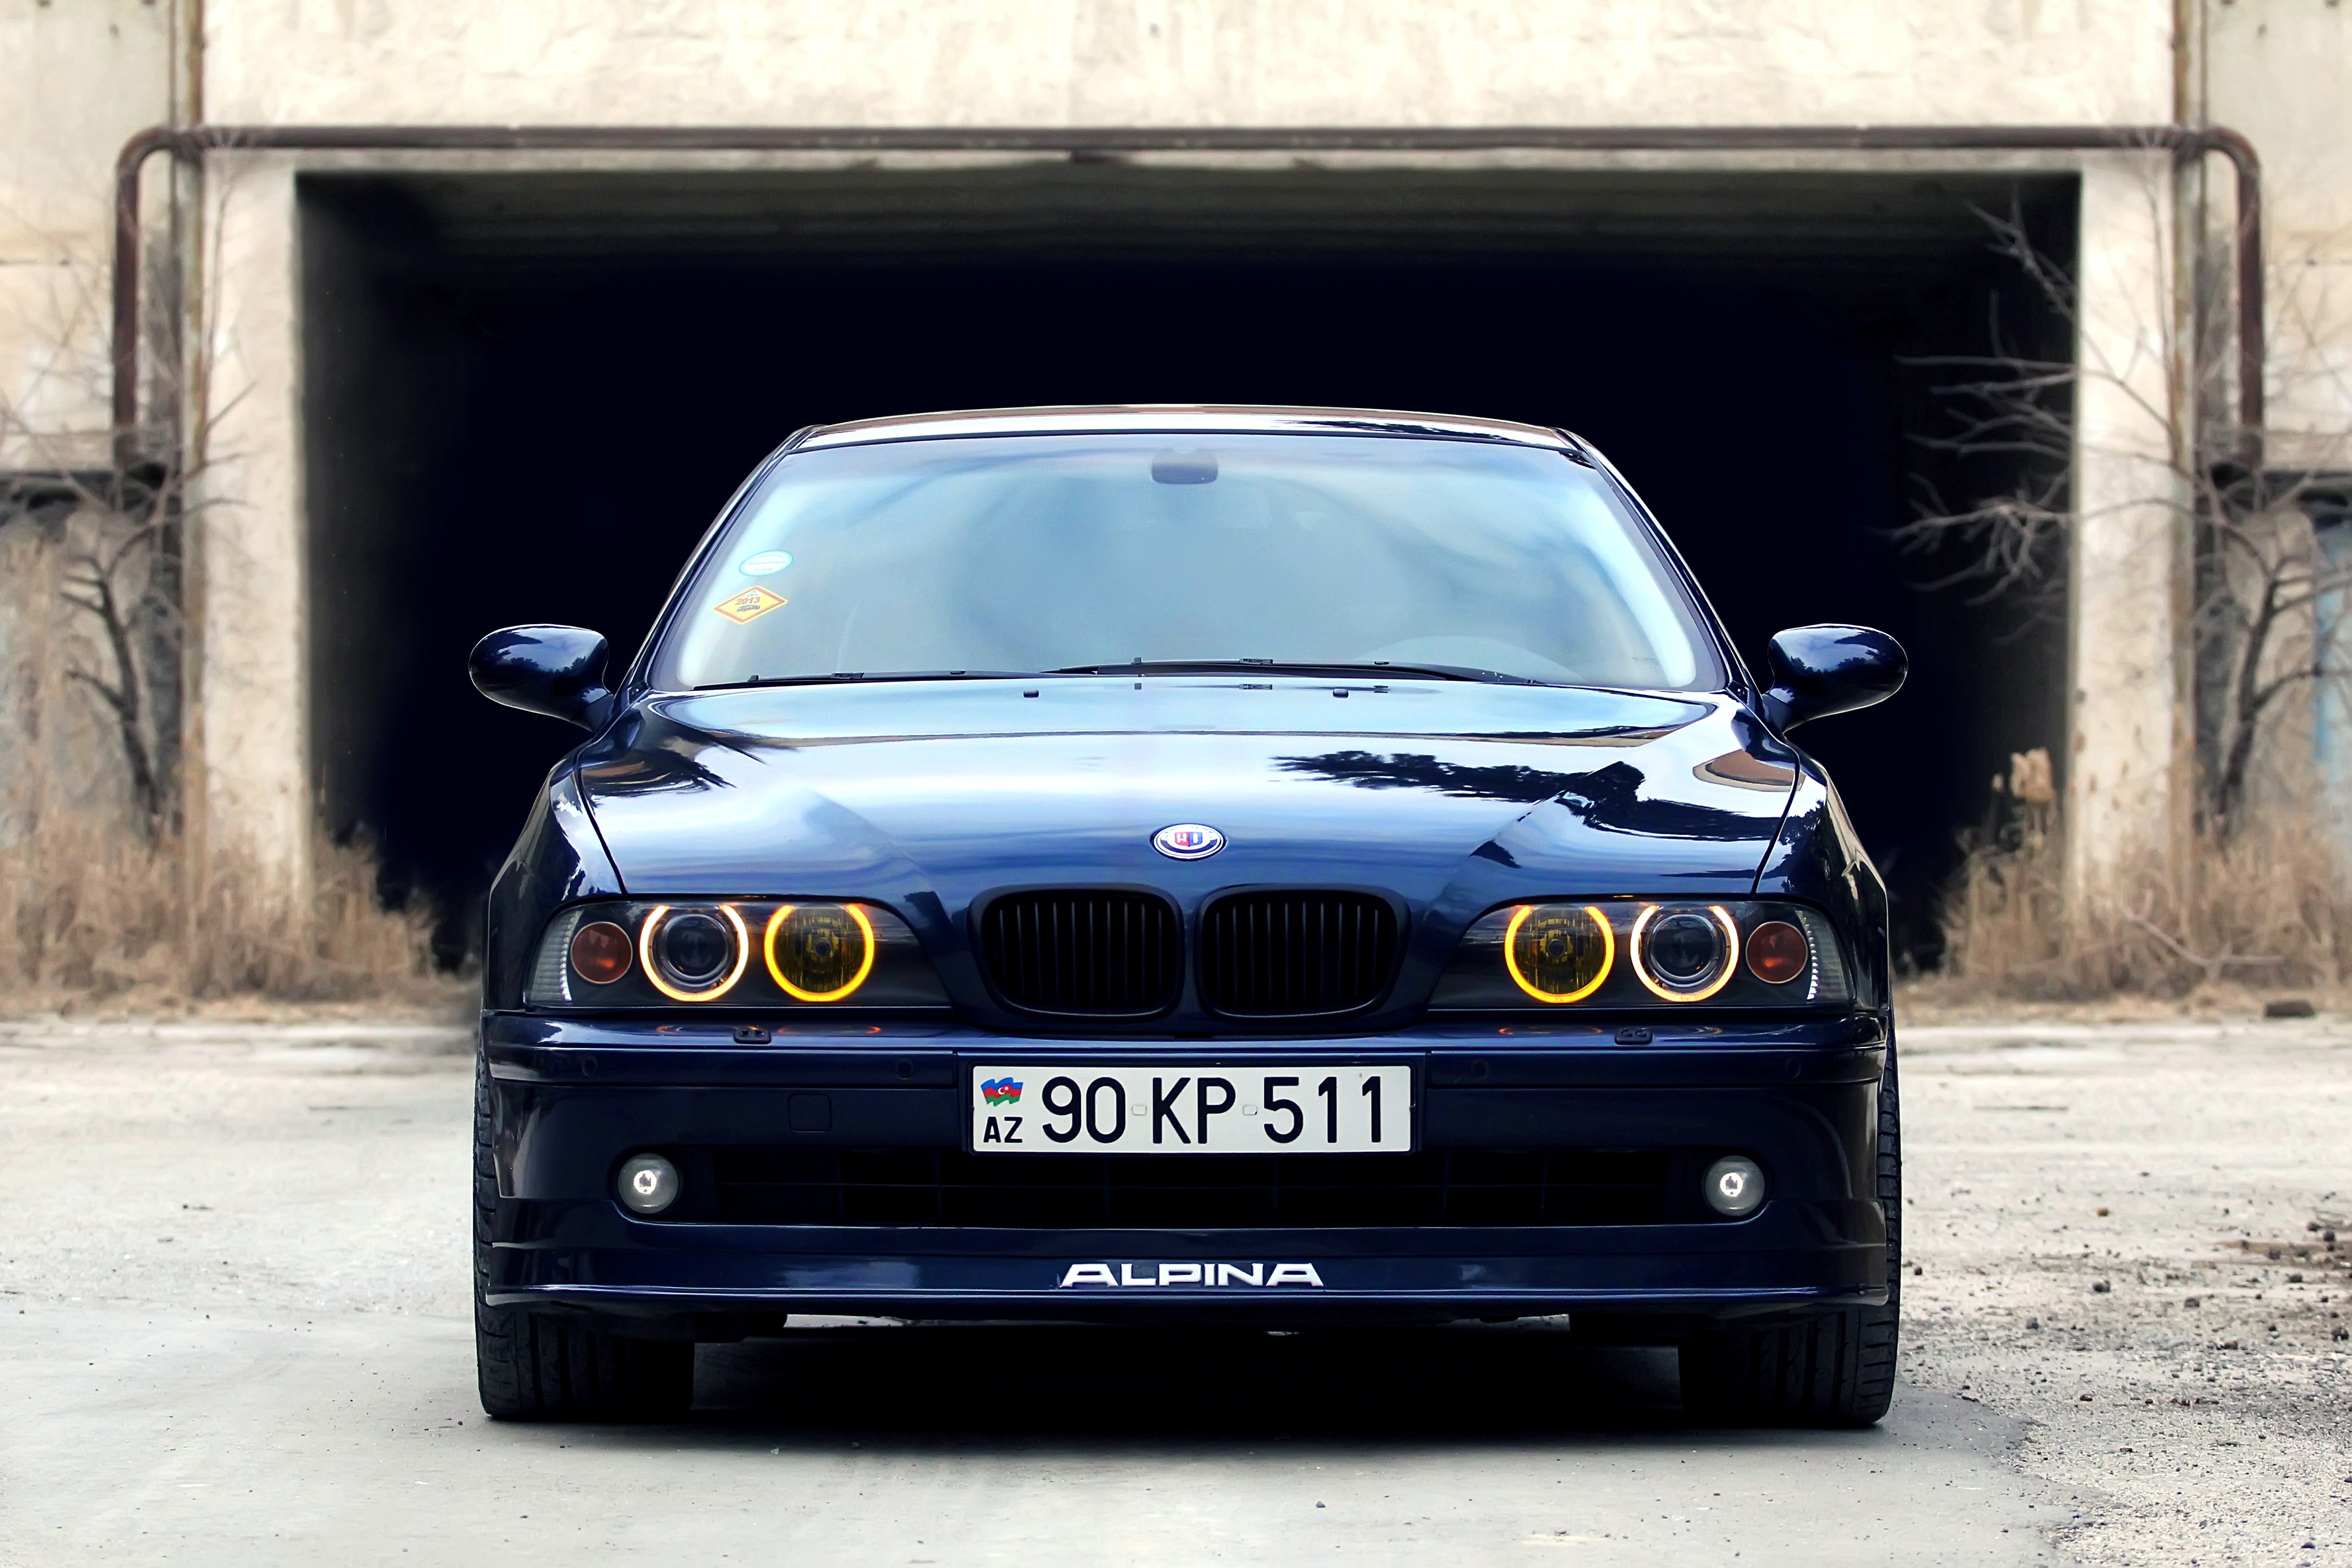 General 4811x3207 BMW car Alpina BMW E39 BMW 5 Series frontal view vehicle numbers blue cars